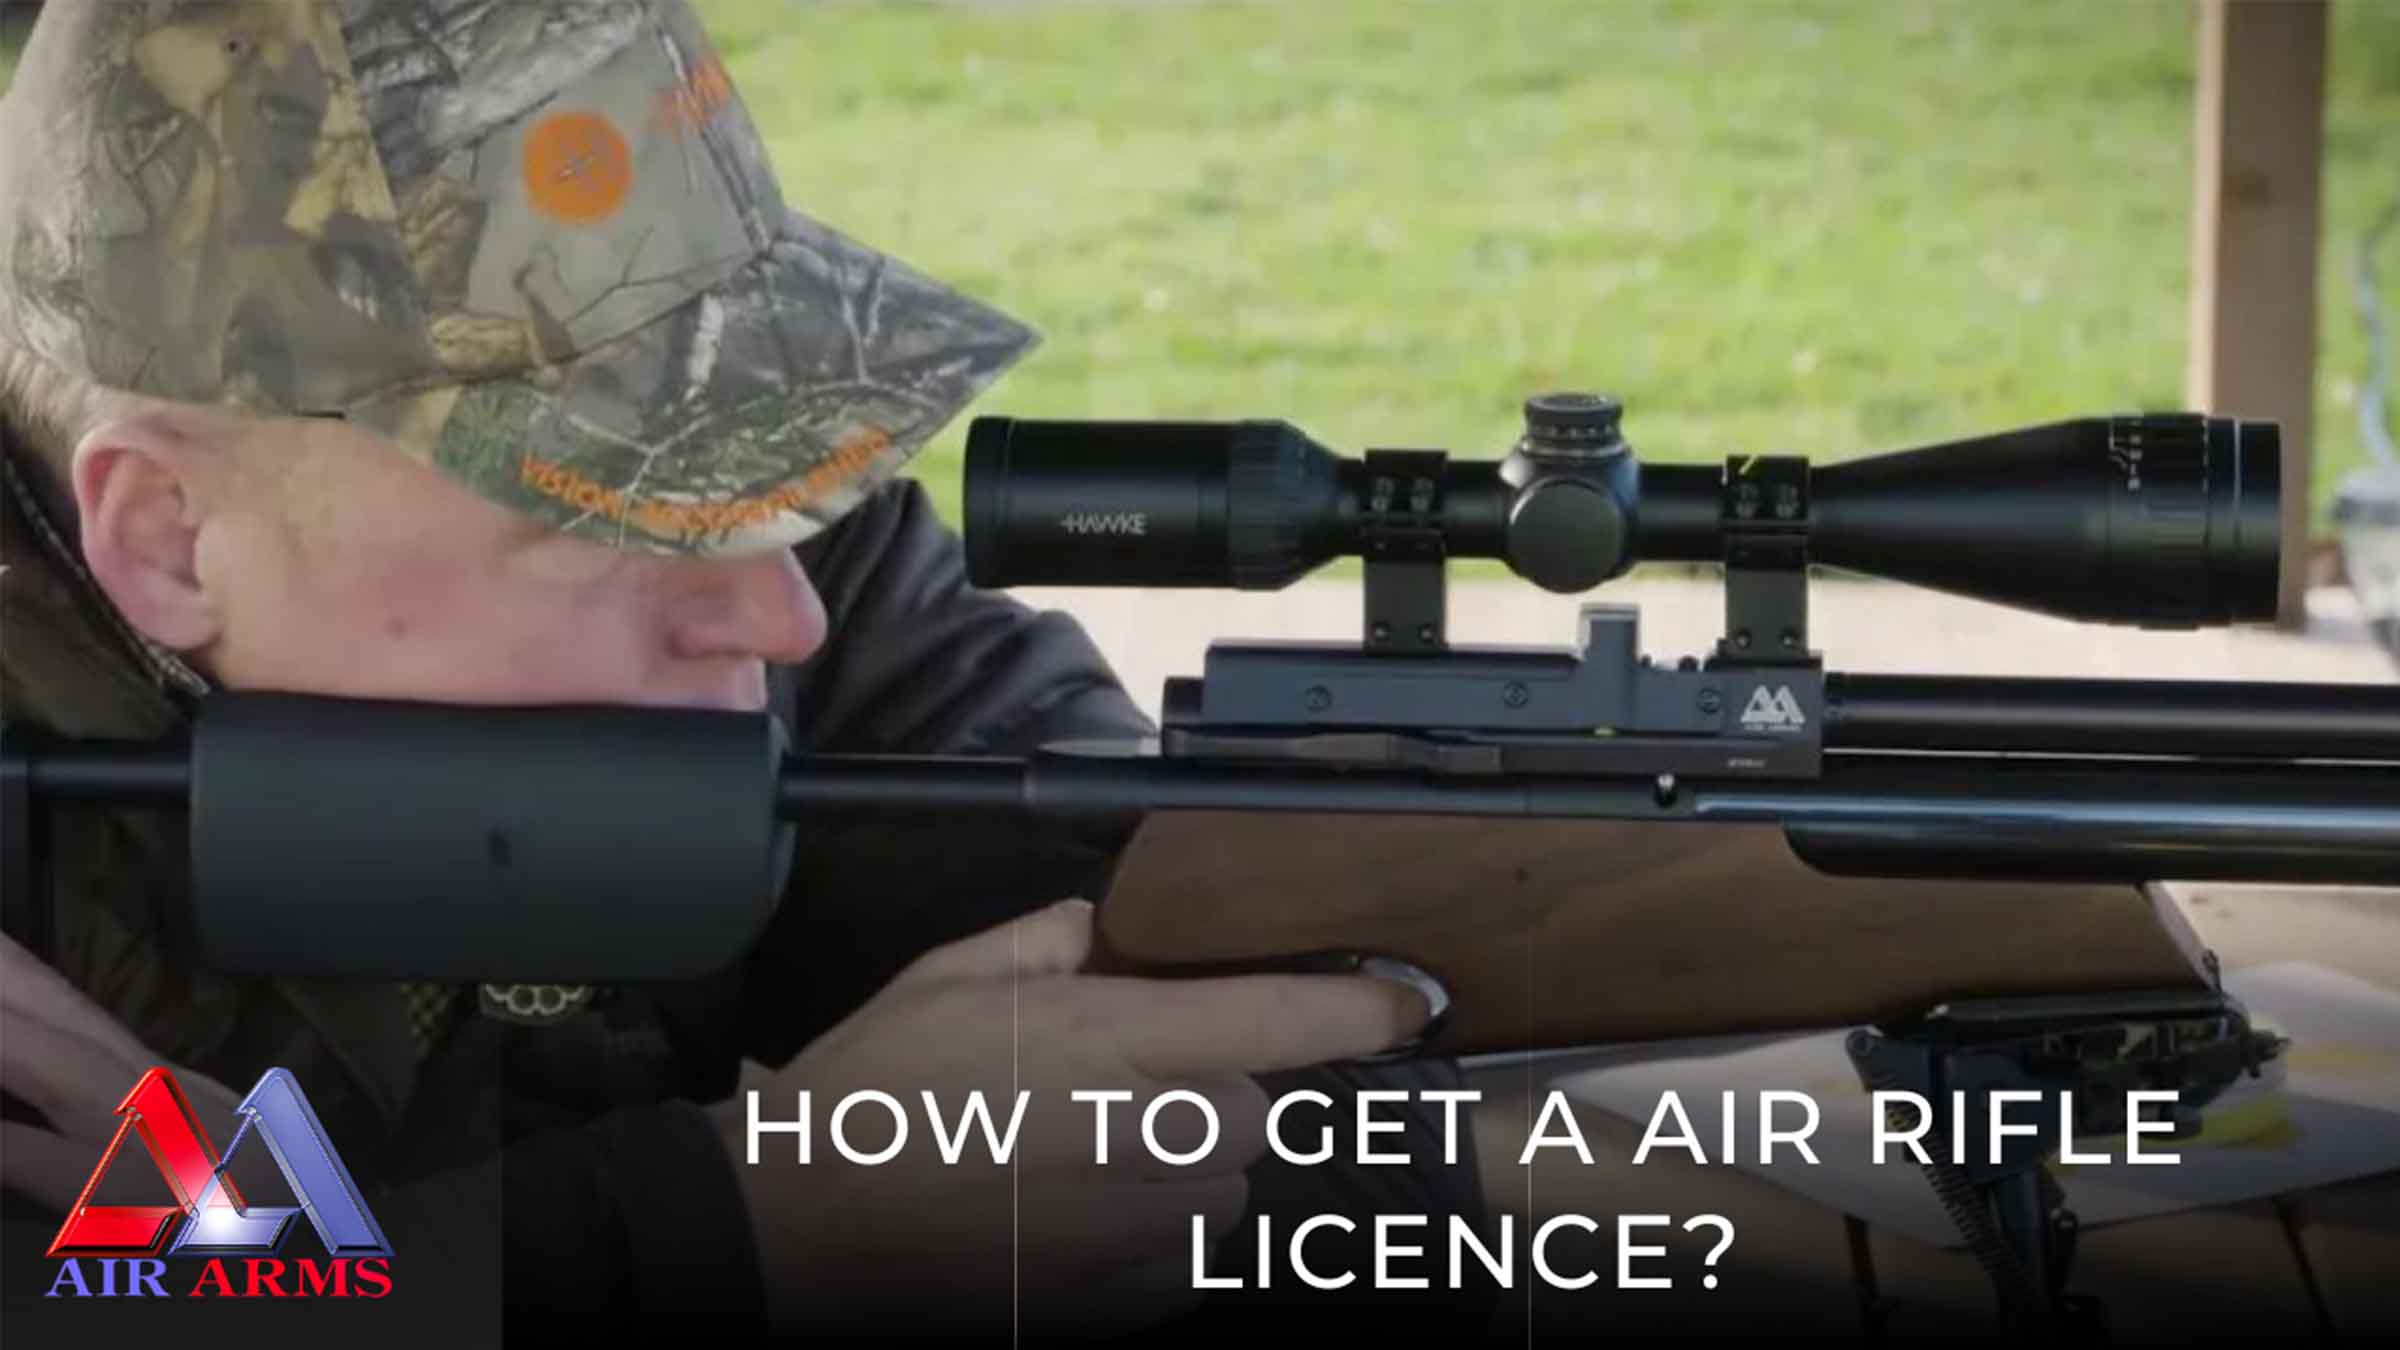 How to get an Air Rifle Licence?